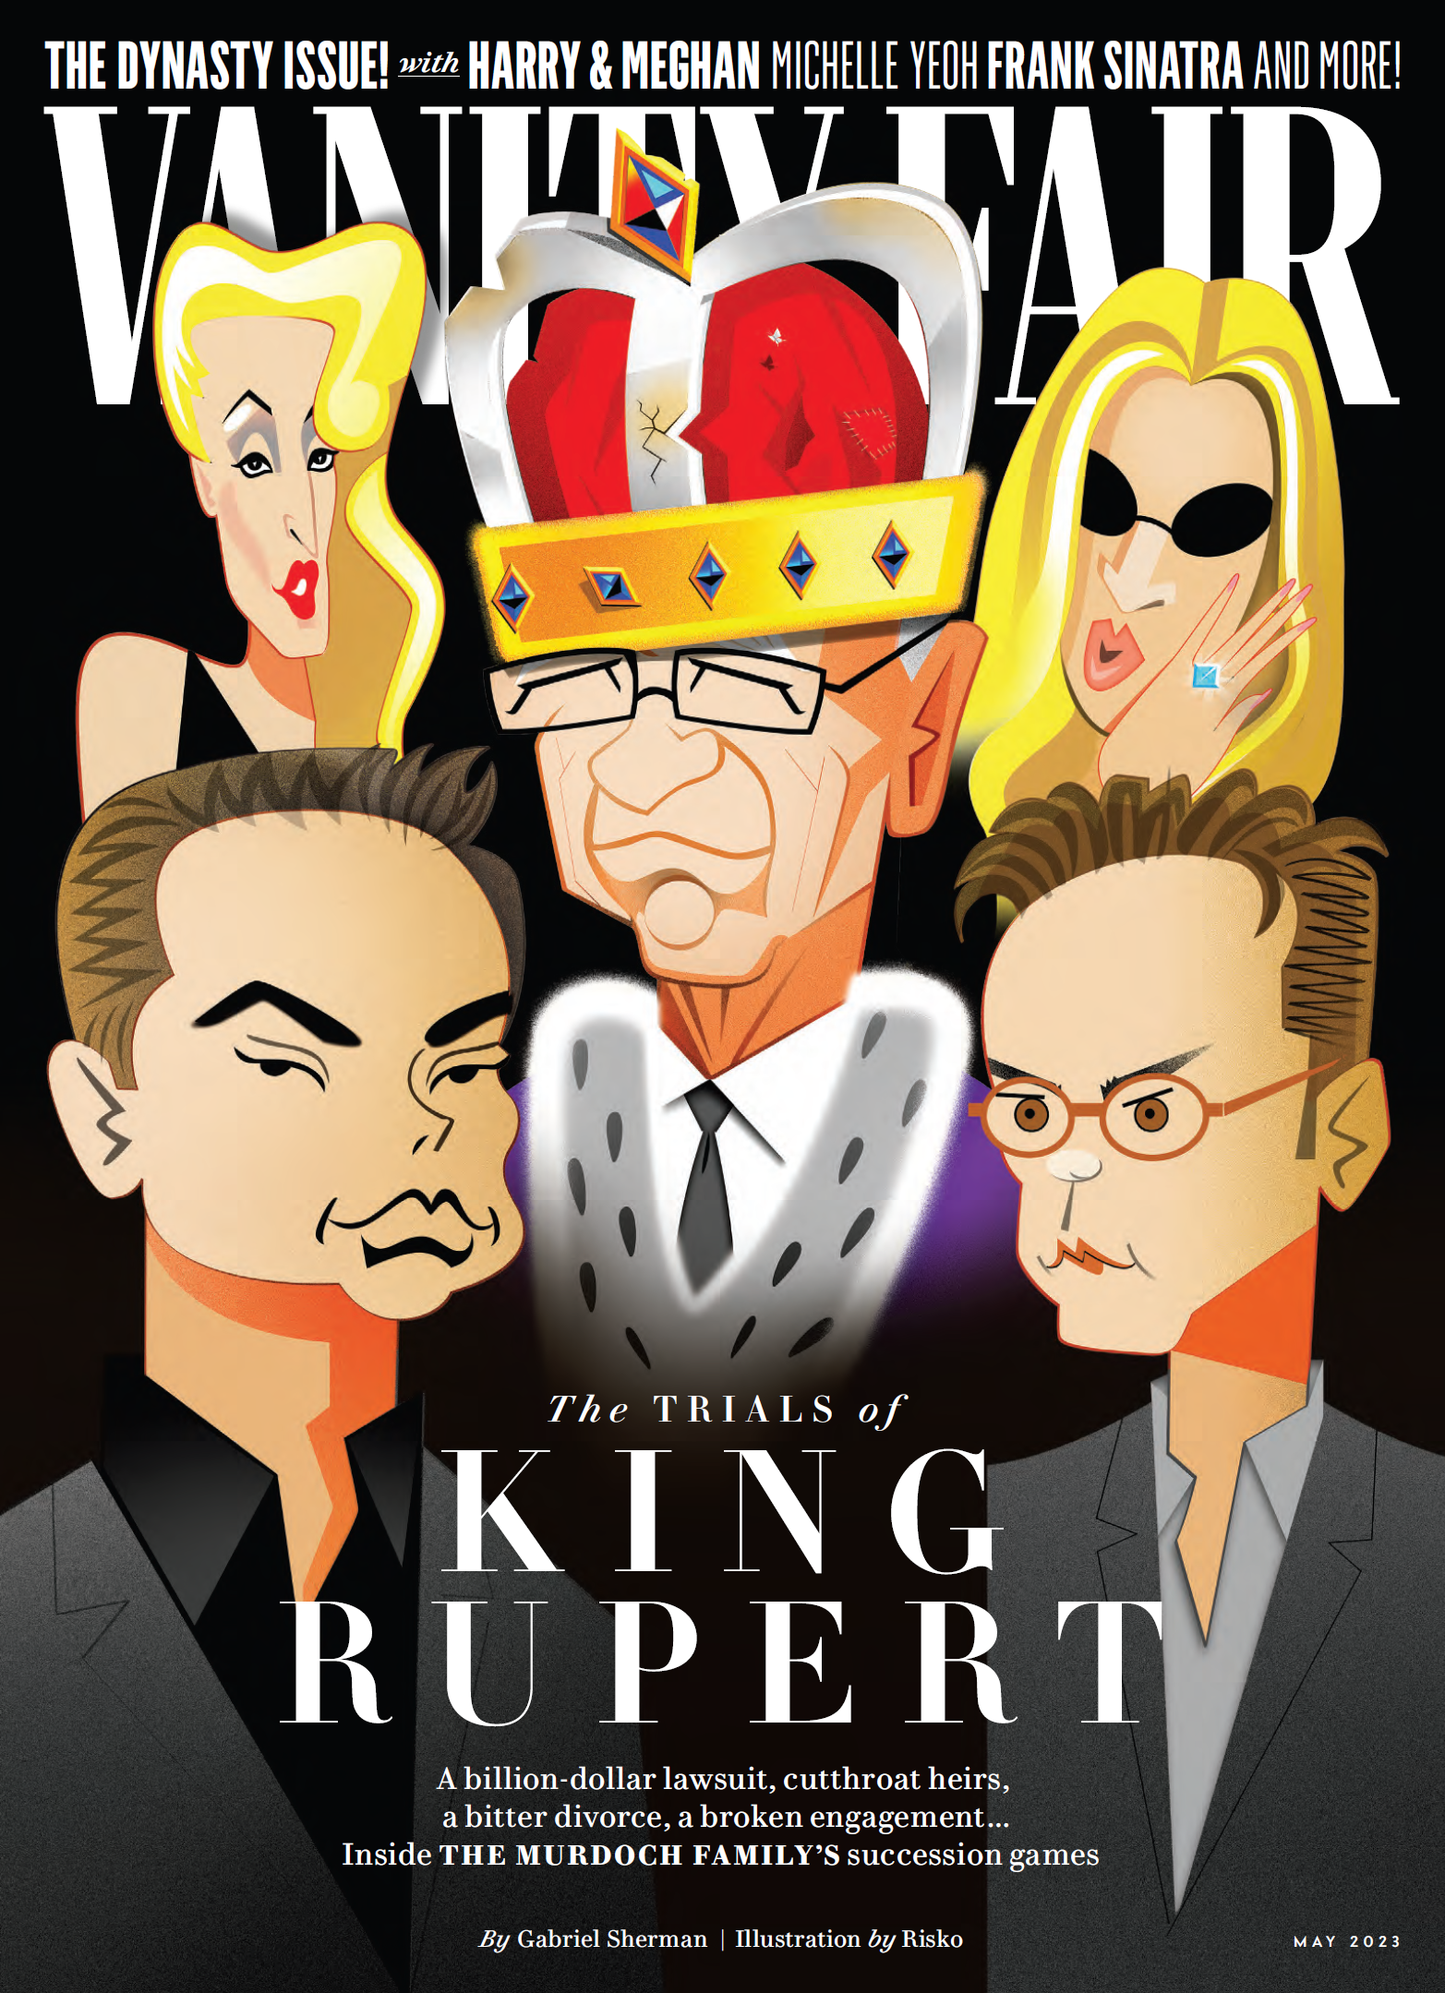 cover of vanity Fair magazine featuring the trials of King Rupert and jewelry from the wandering jewel